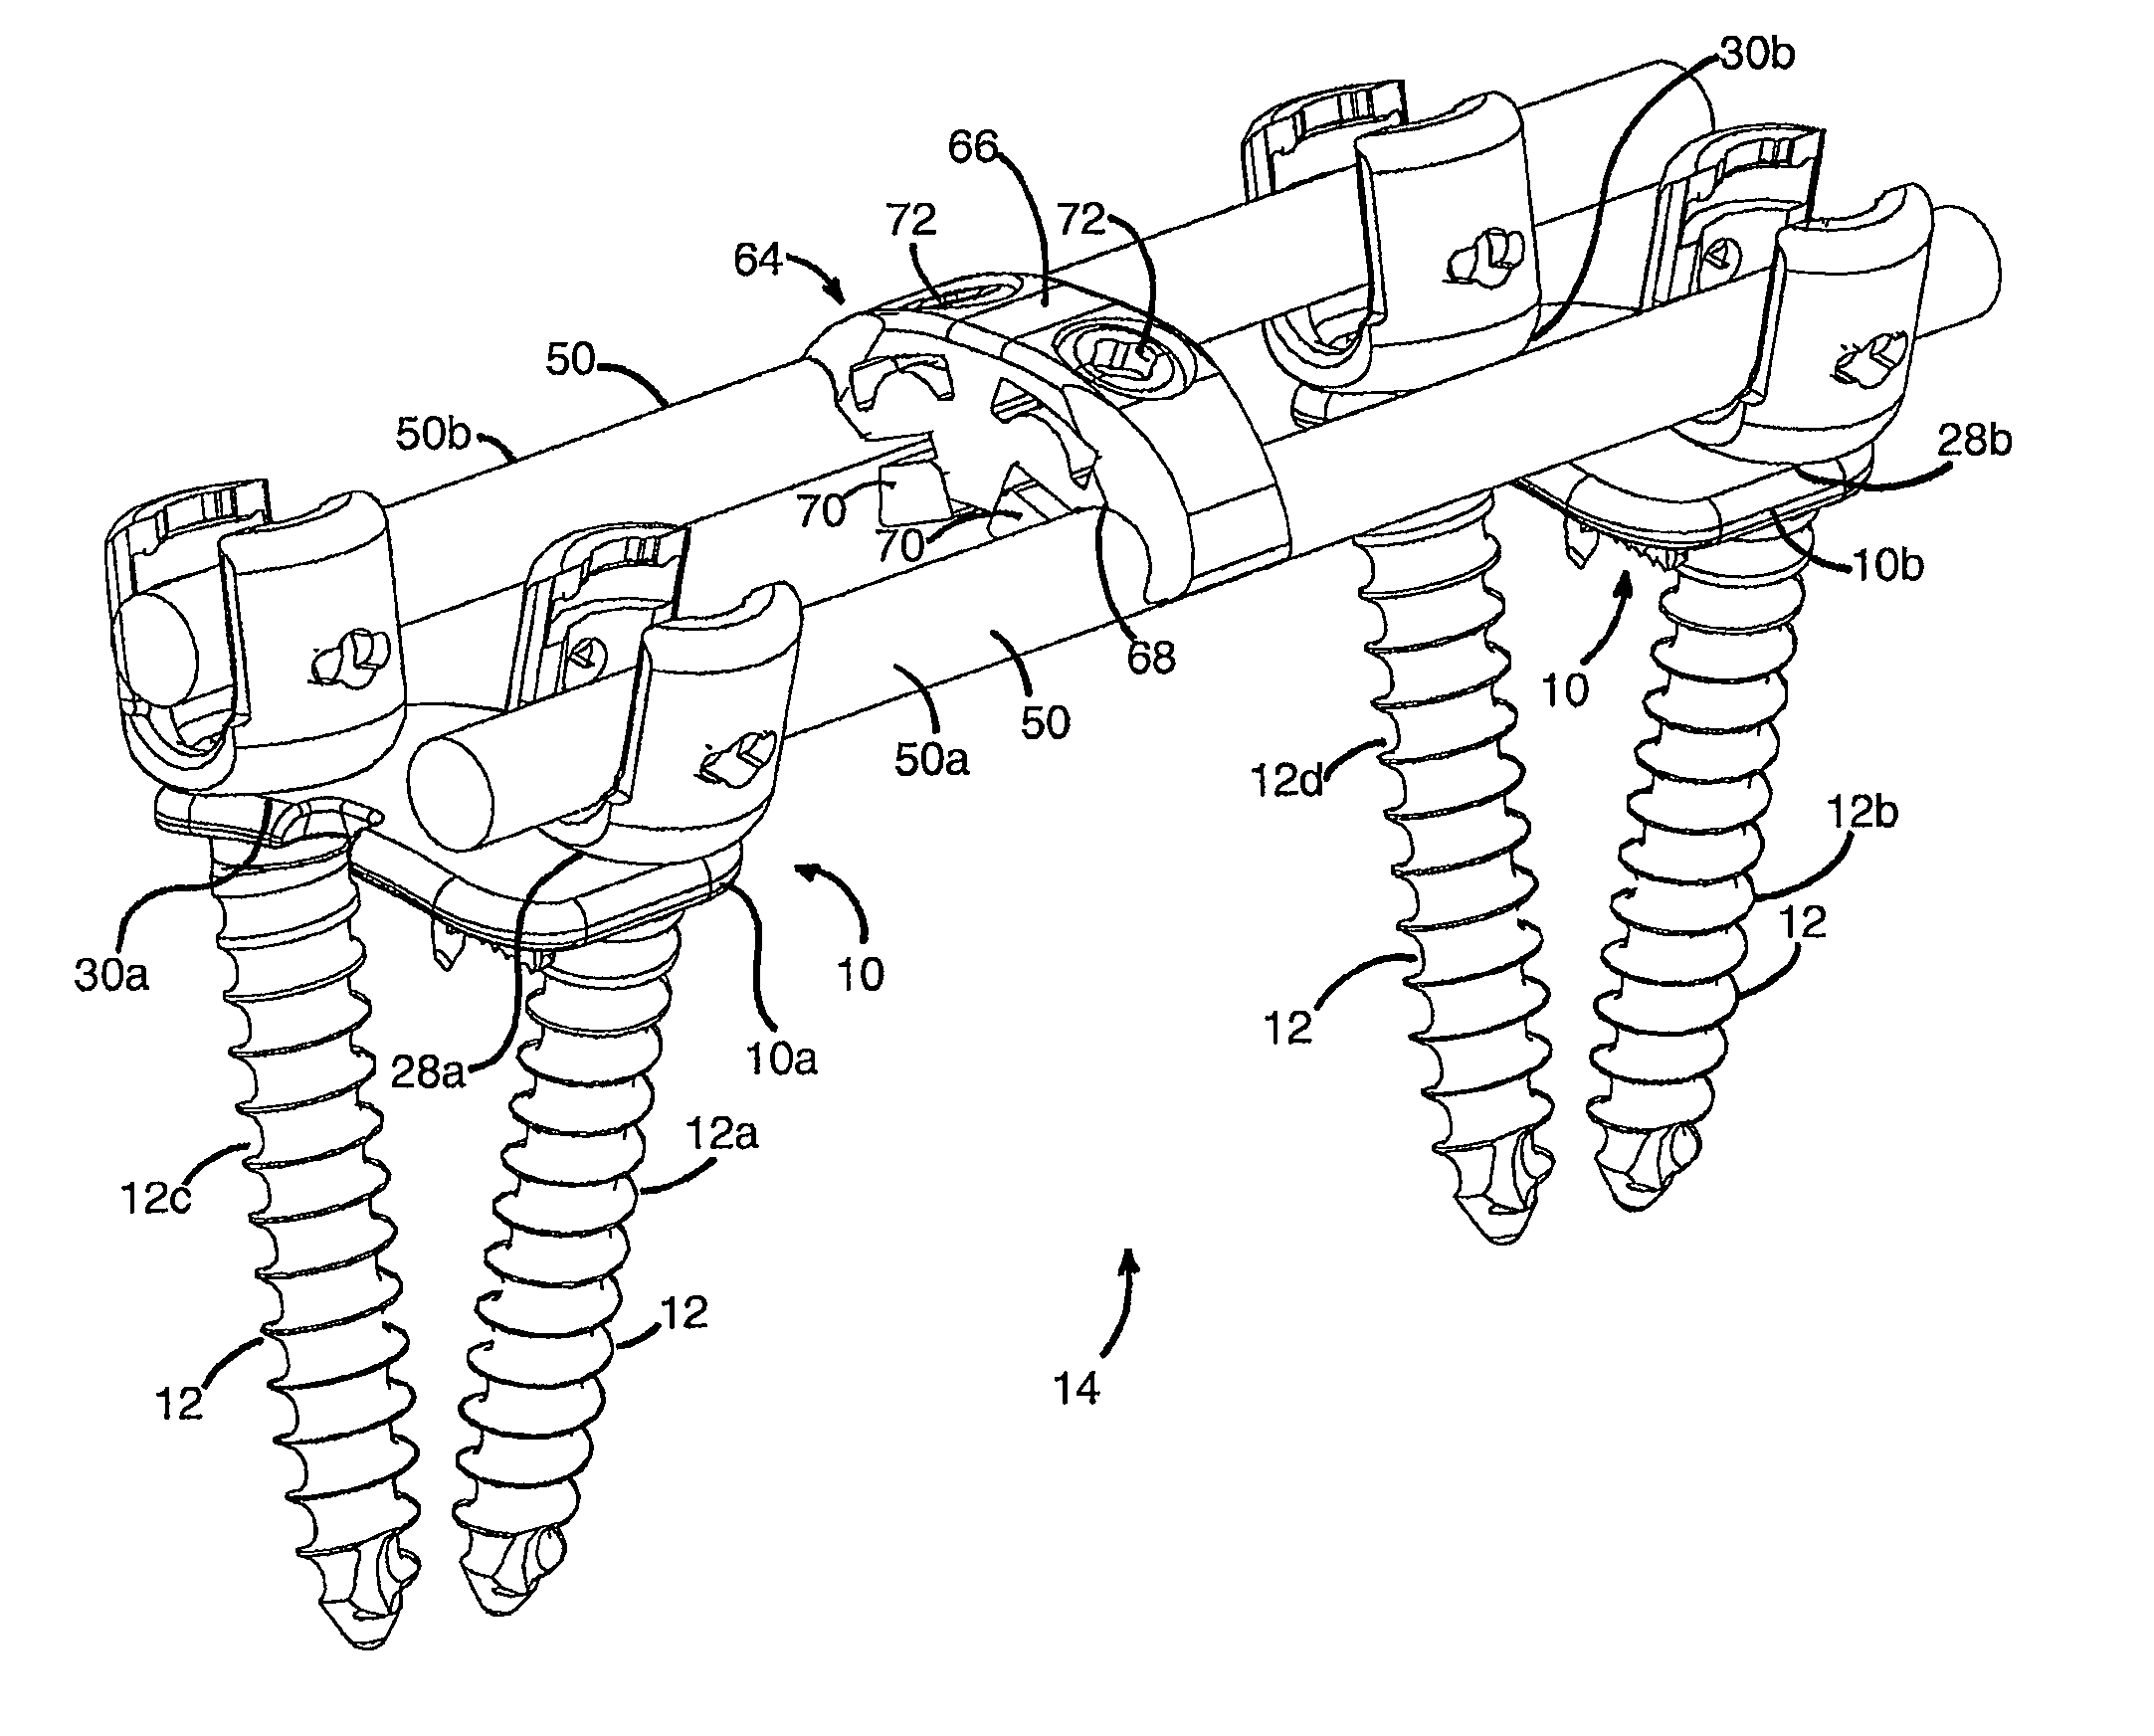 Mounting devices for fixation devices and insertion instruments used therewith